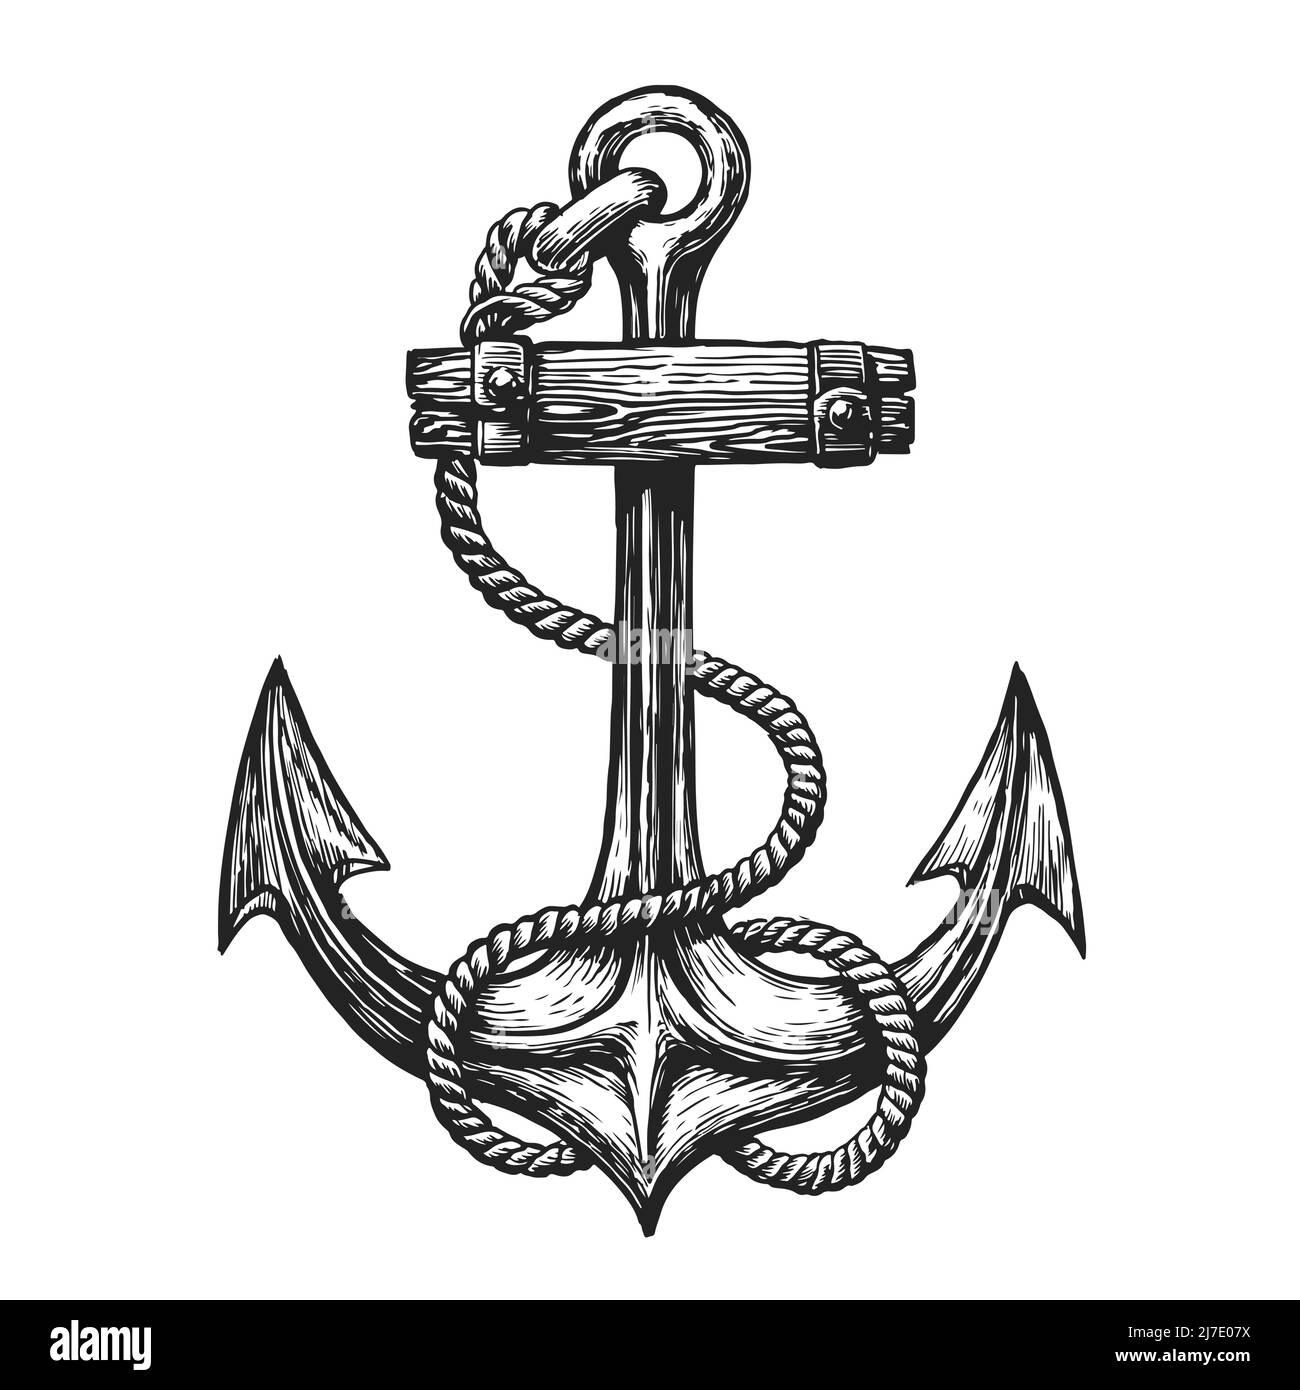 Vintage anchor with rope drawn in engraving style. Hand drawn seafaring symbol. Vector illustration Stock Vector